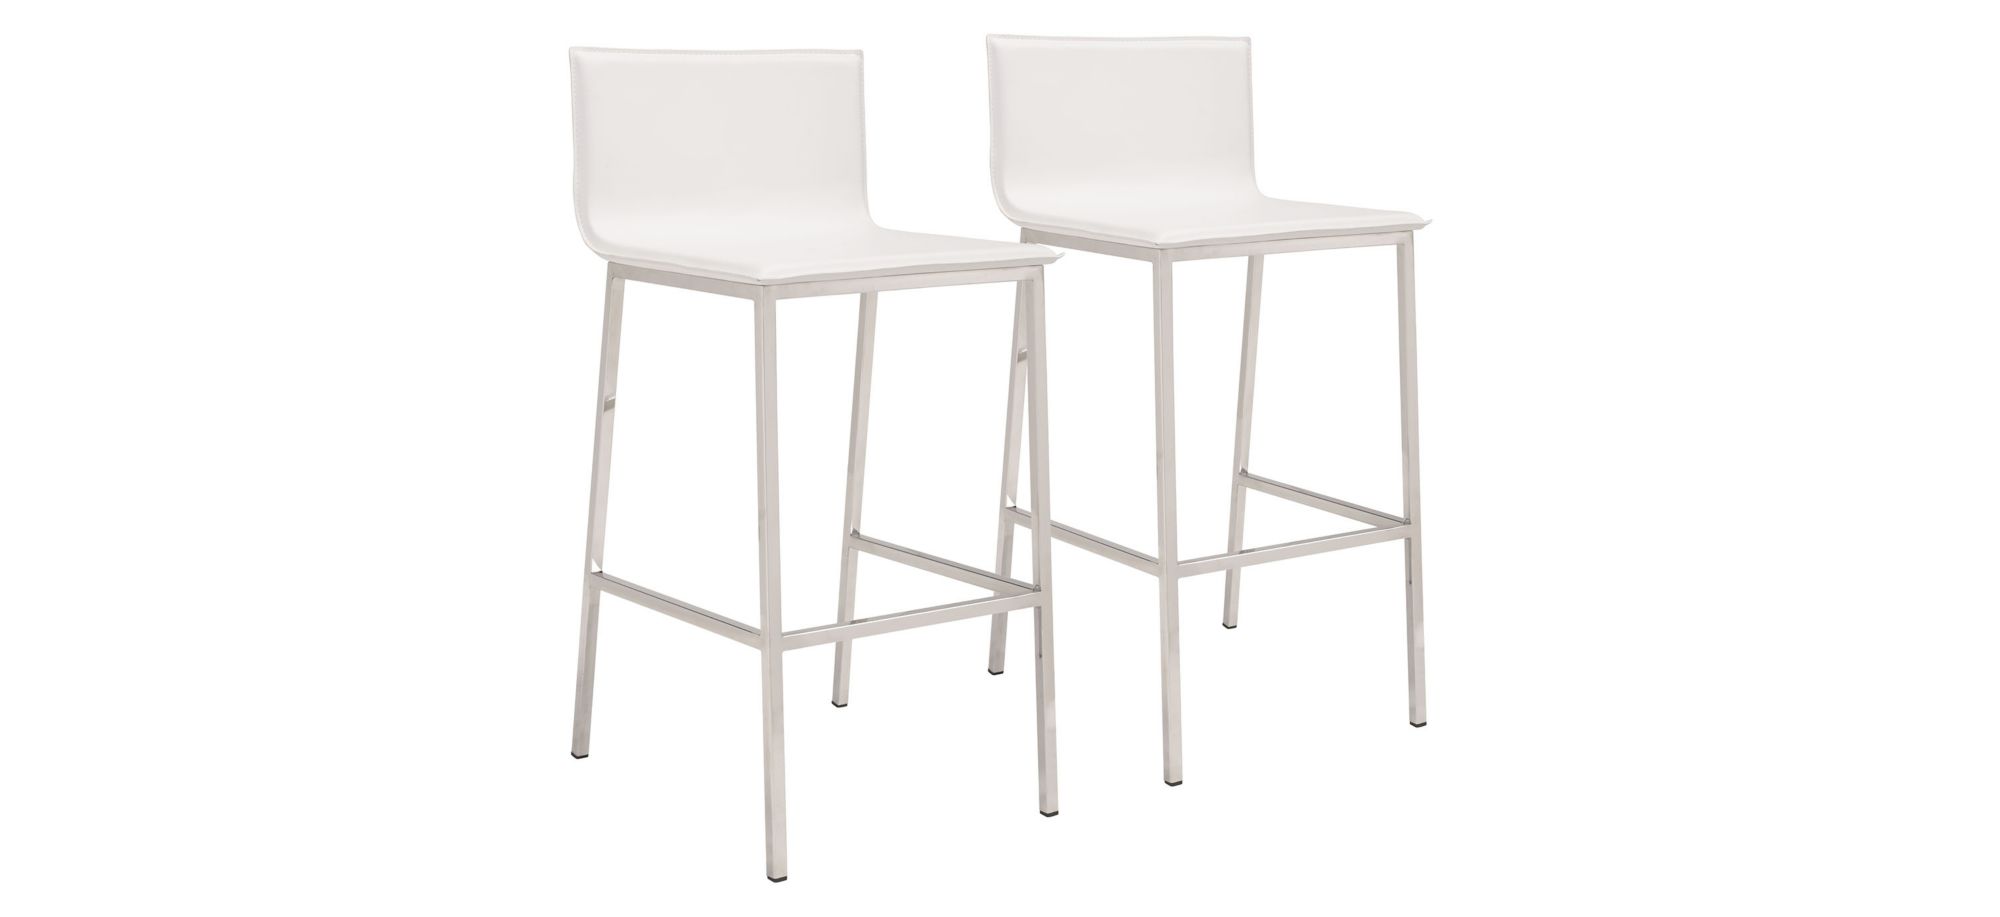 Marina Bar Stool: Set of 2 in White, Silver by Zuo Modern